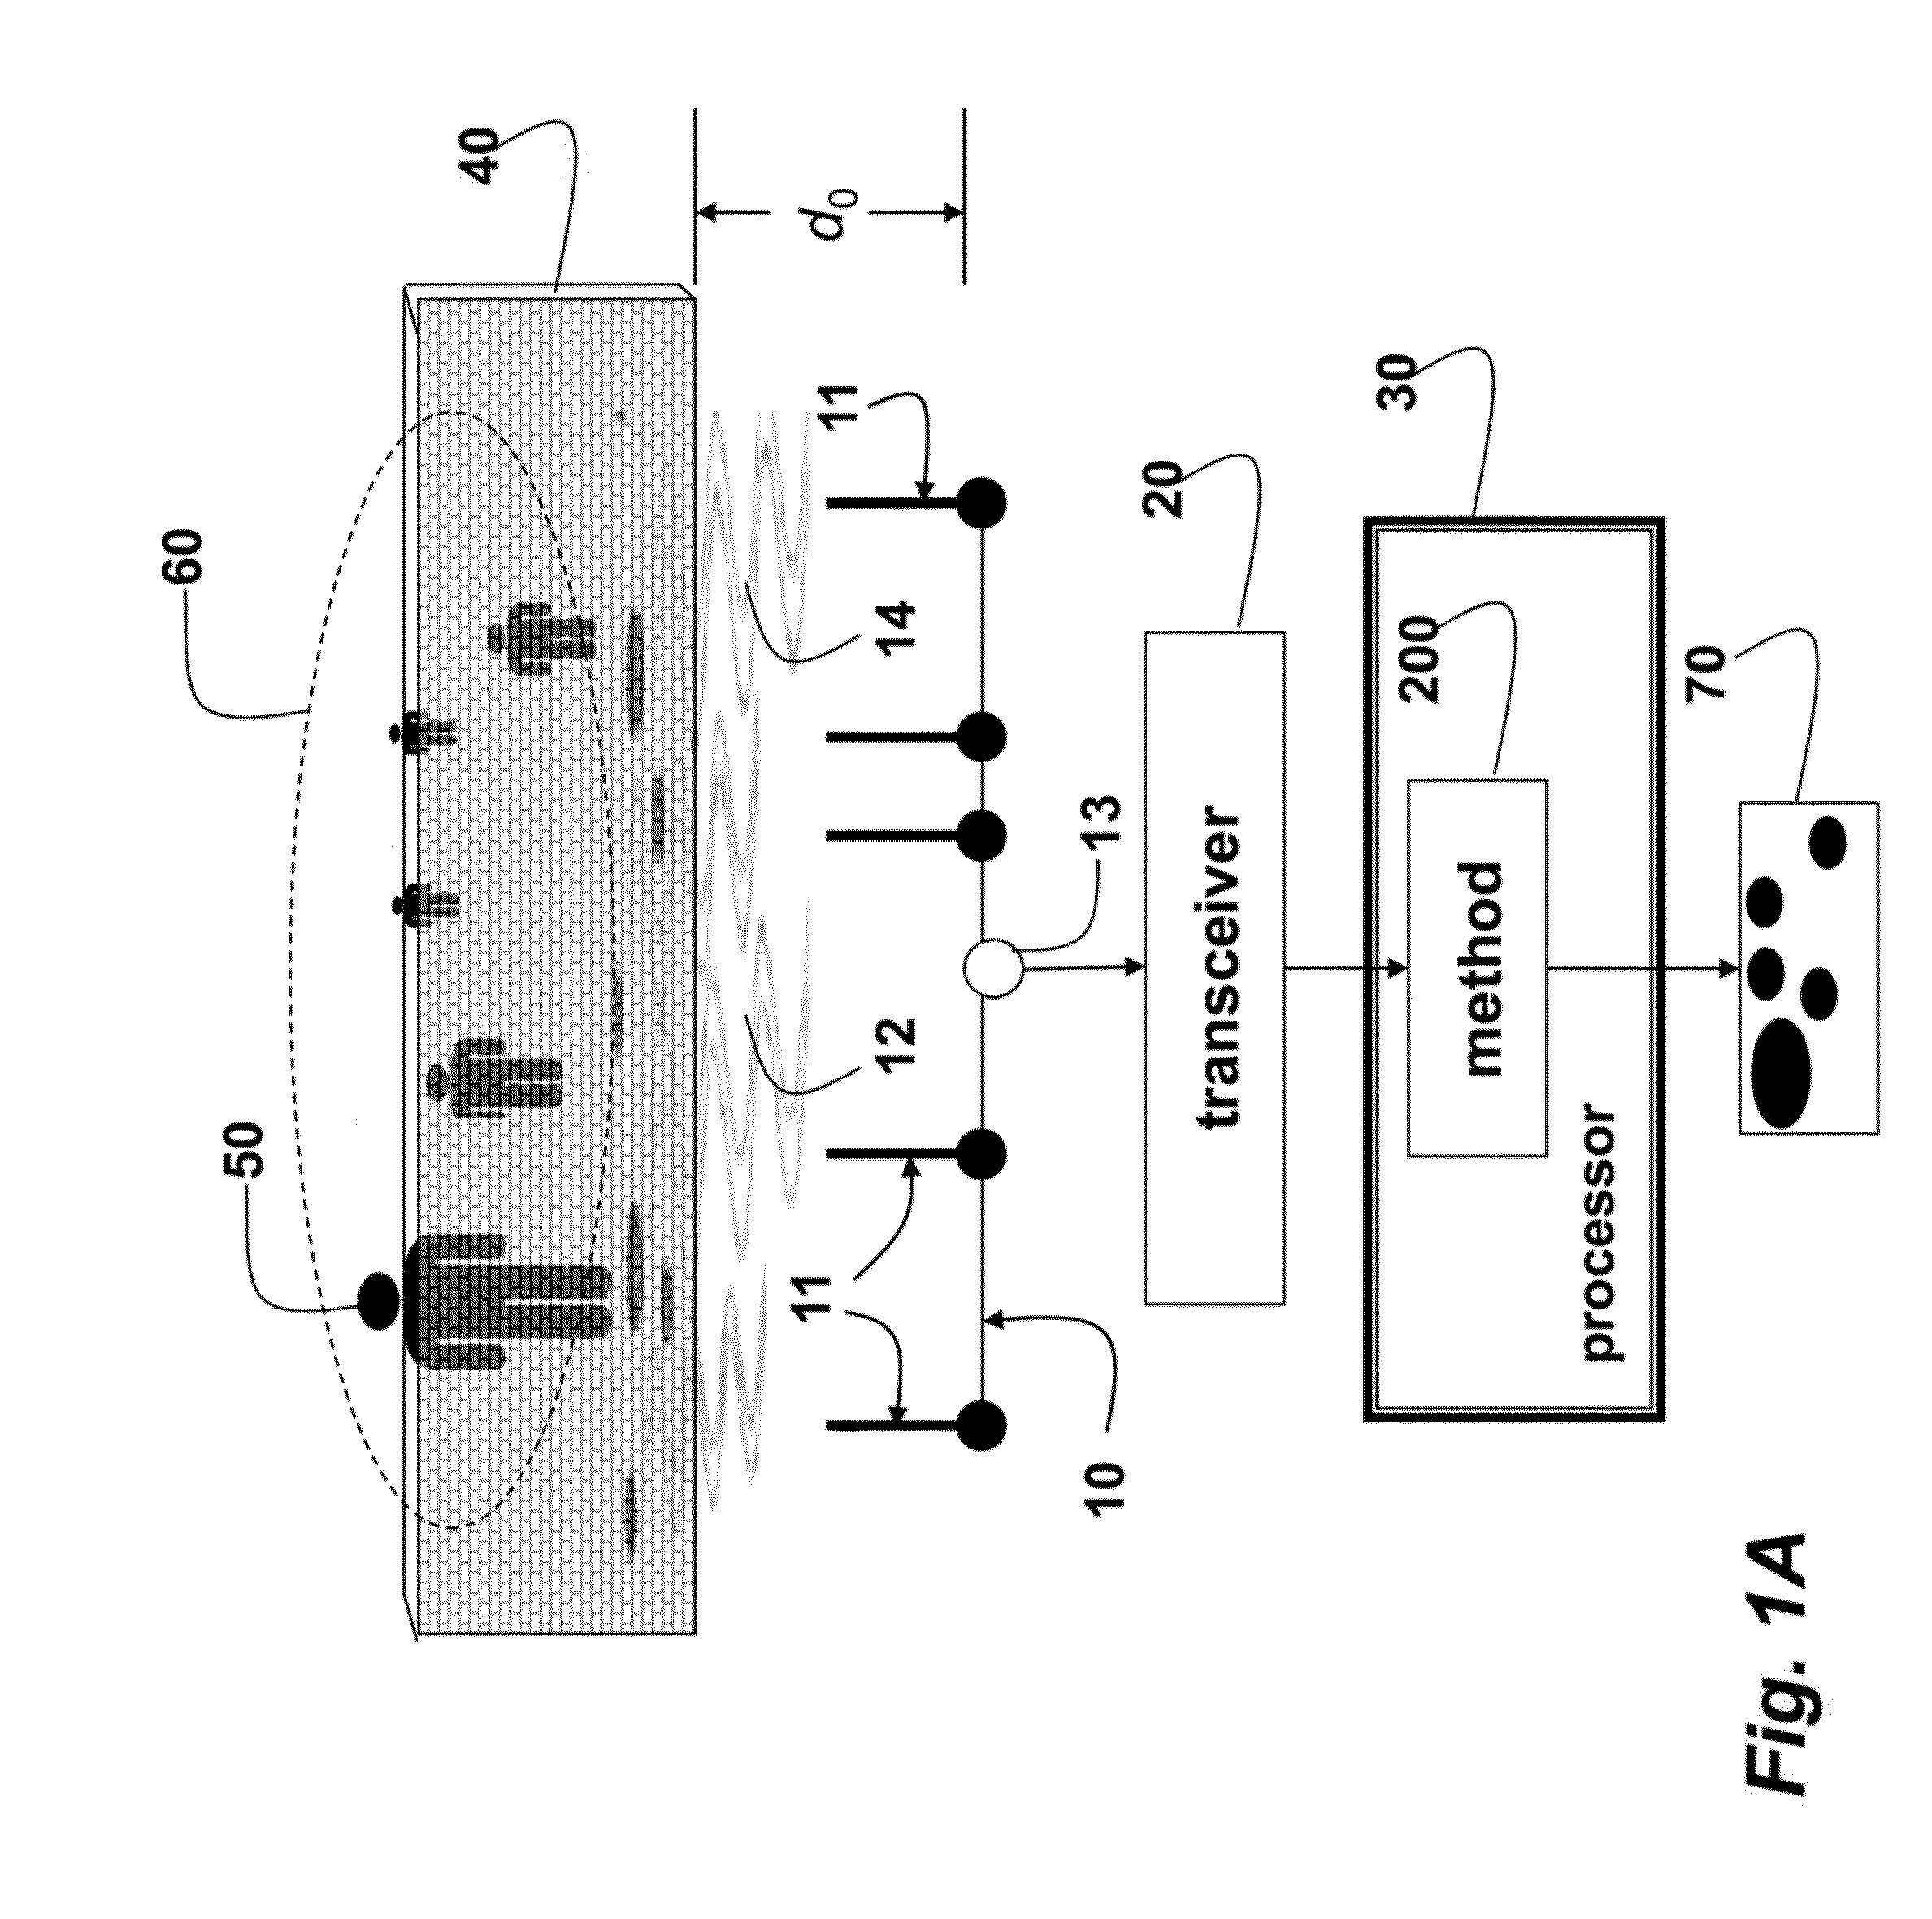 Method and System for Through-the-Wall Imaging using Compressive Sensing and MIMO Antenna Arrays